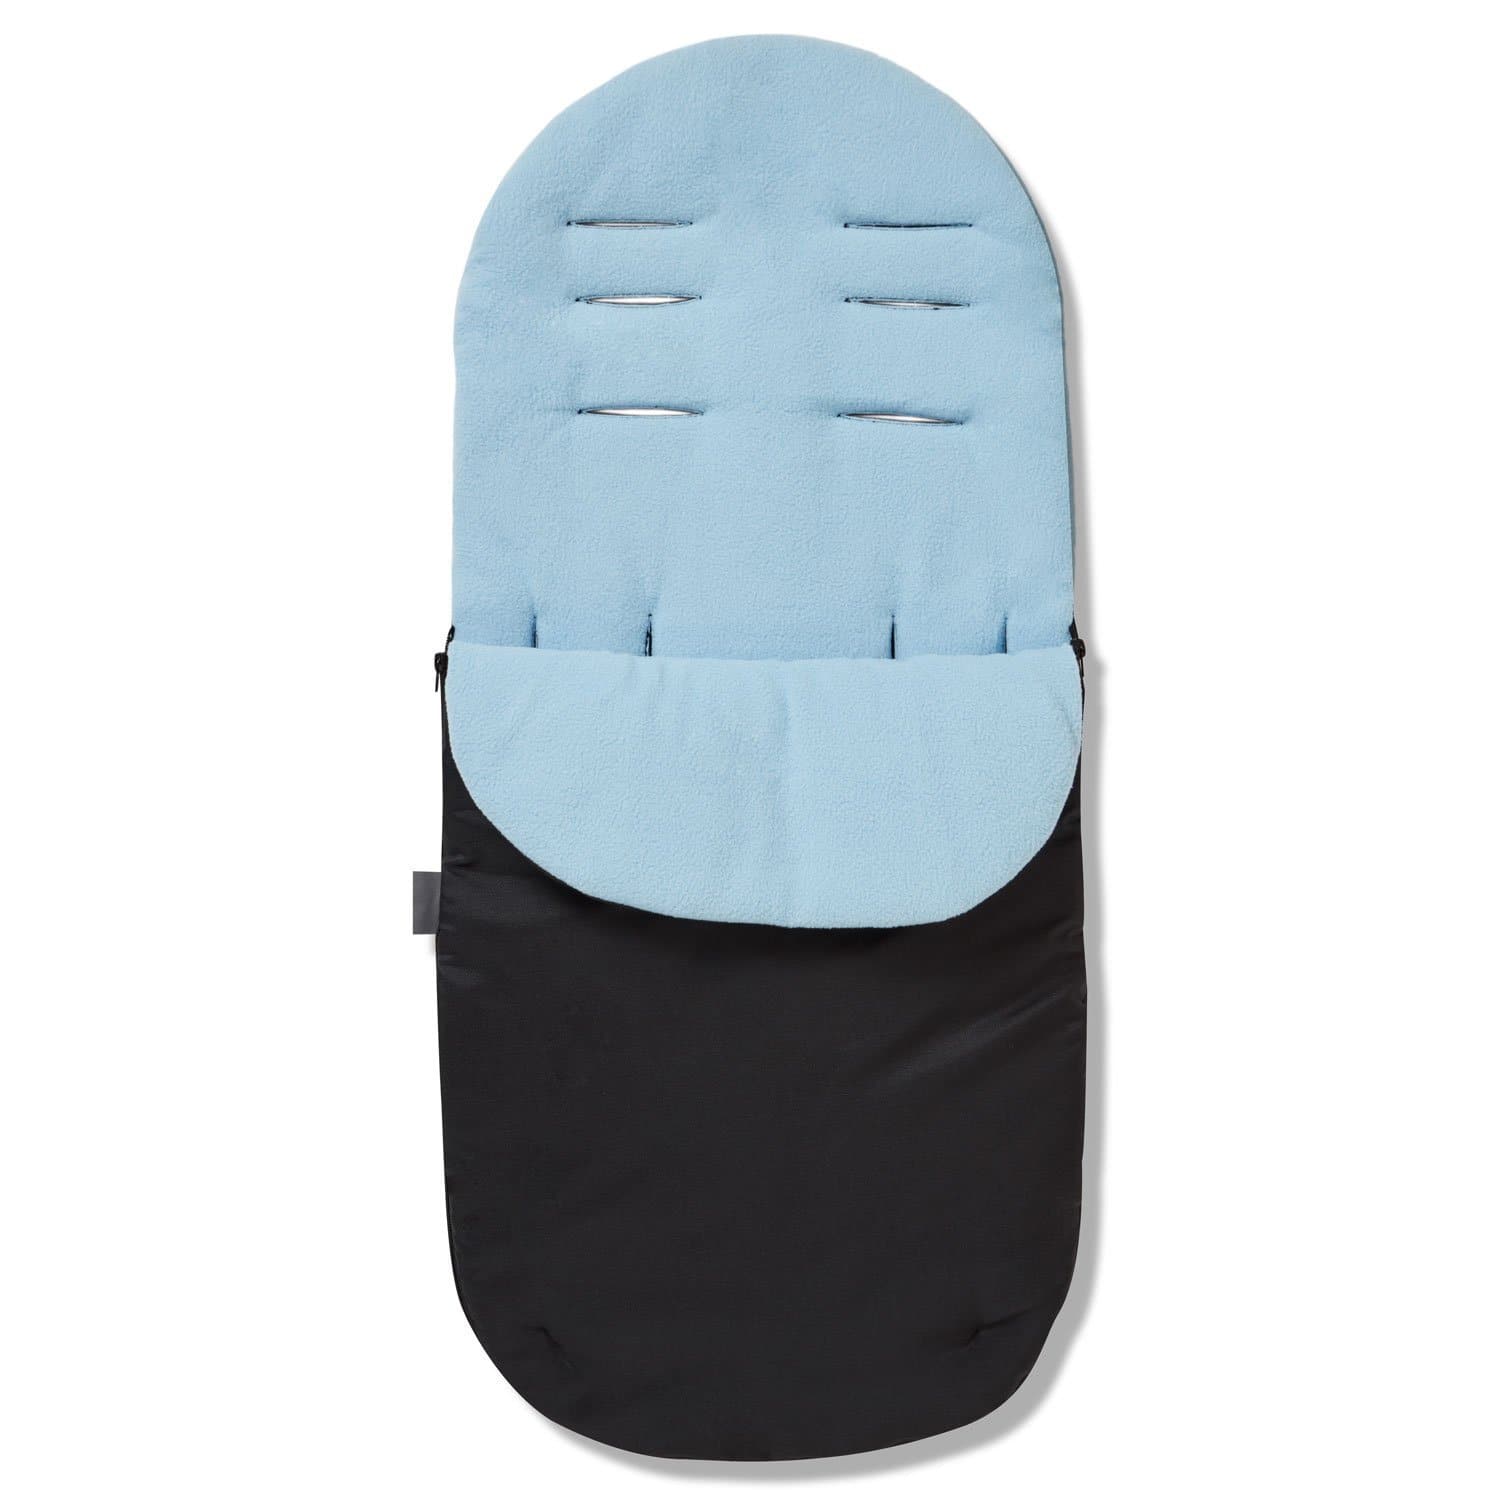 Footmuff / Cosy Toes Compatible with Kiddy - Light Blue / Fits All Models | For Your Little One